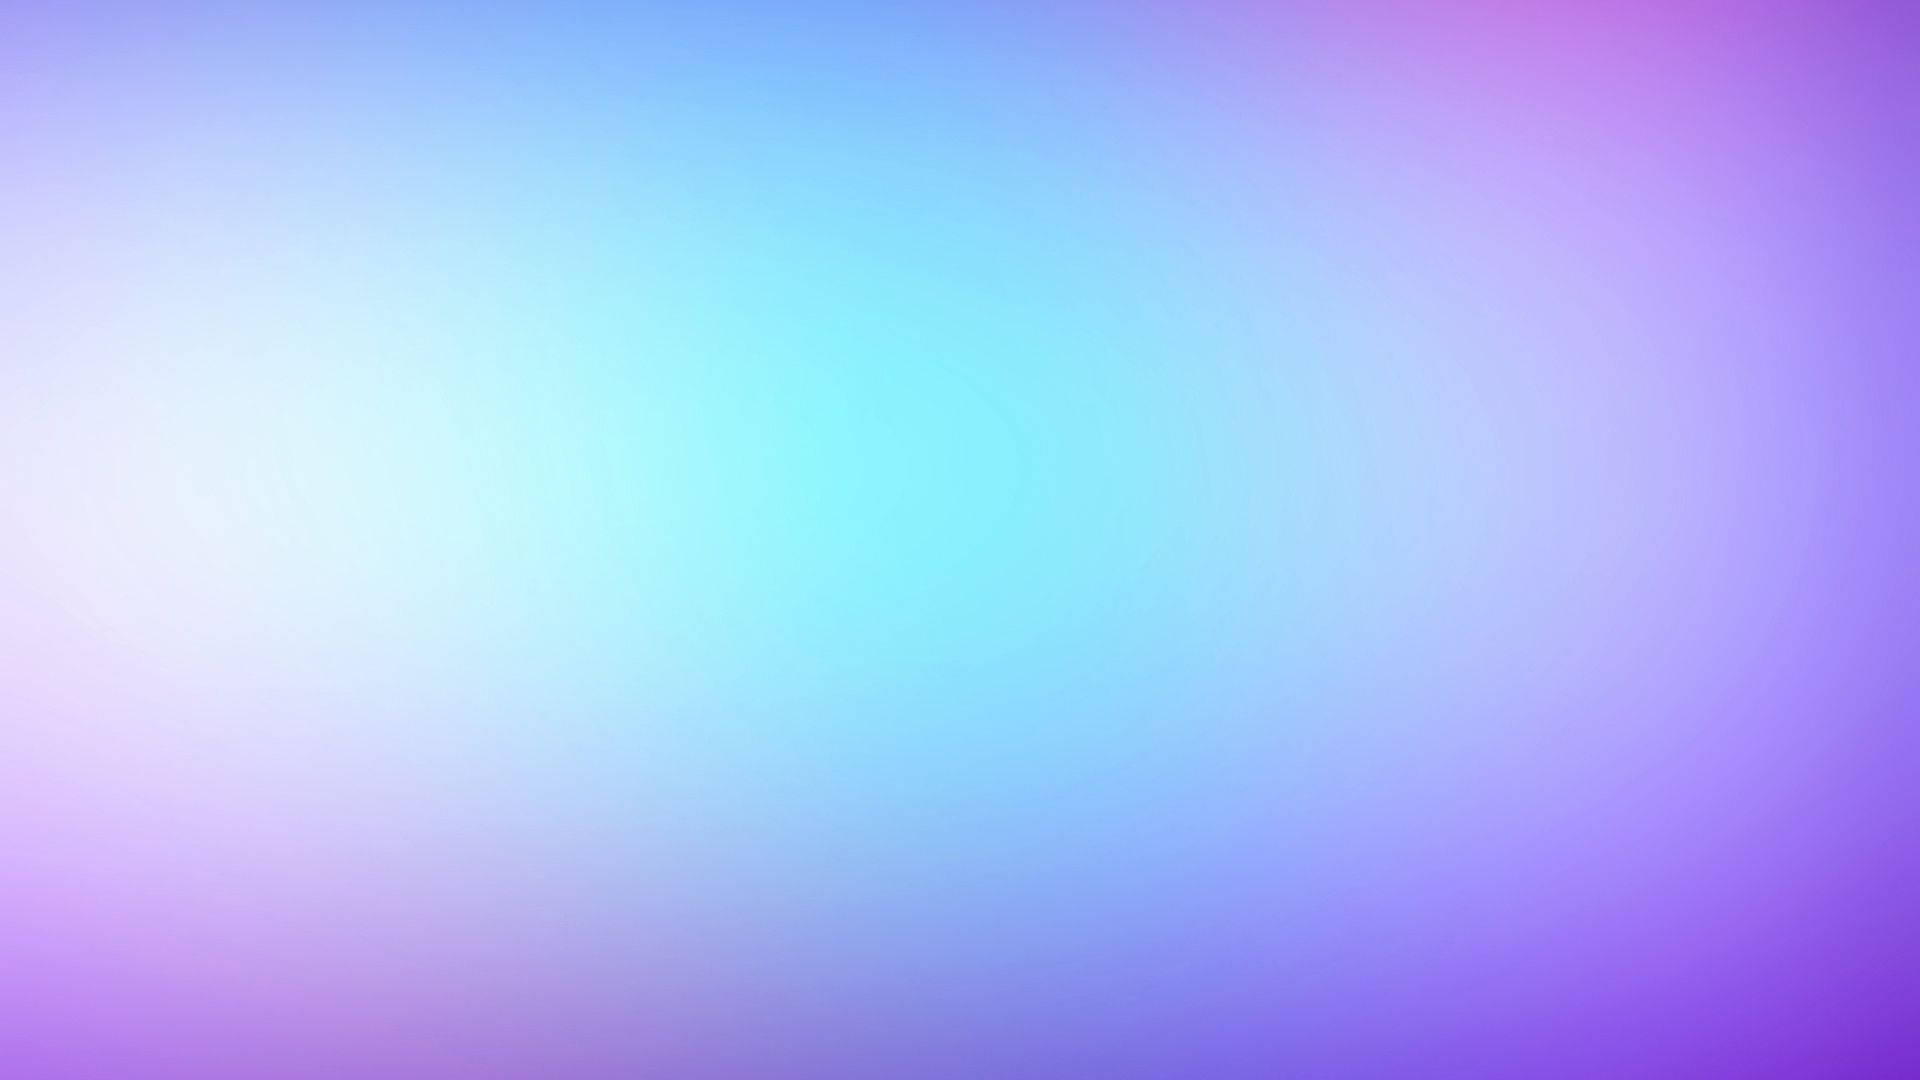 A Blurred Background With Blue And Purple Colors Wallpaper